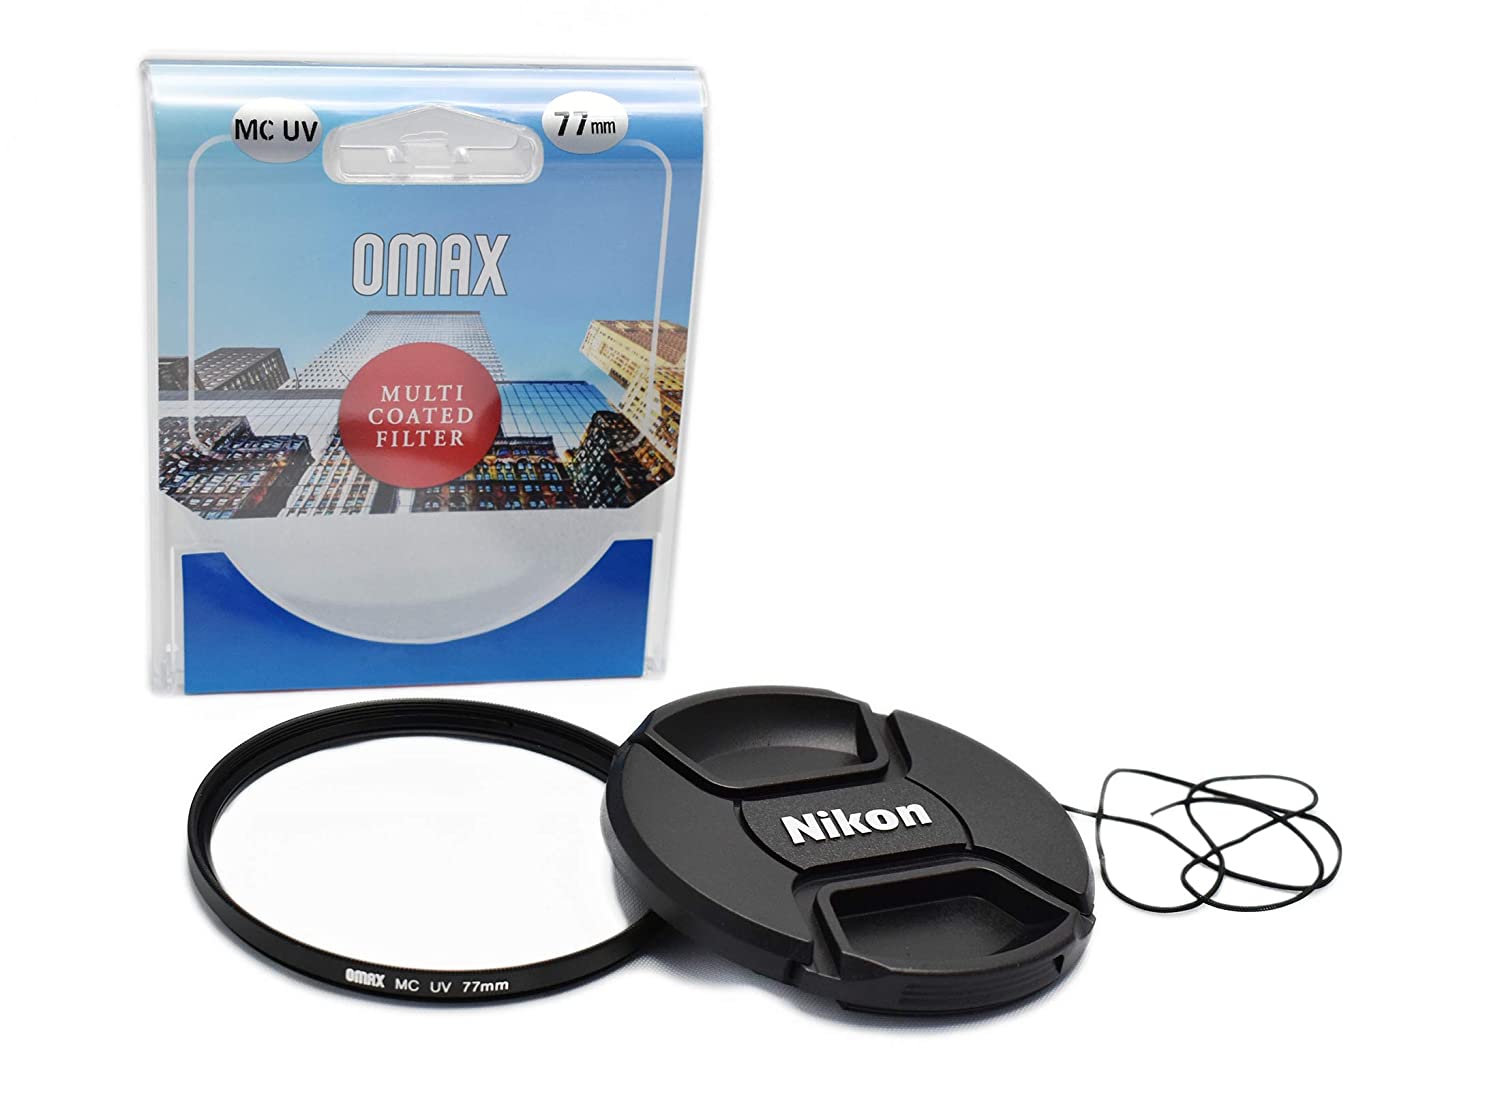 Omax Combo of 77mm Mc Uv Filter & 77mm Replacement Lens Cap for Nikon - The Camerashop